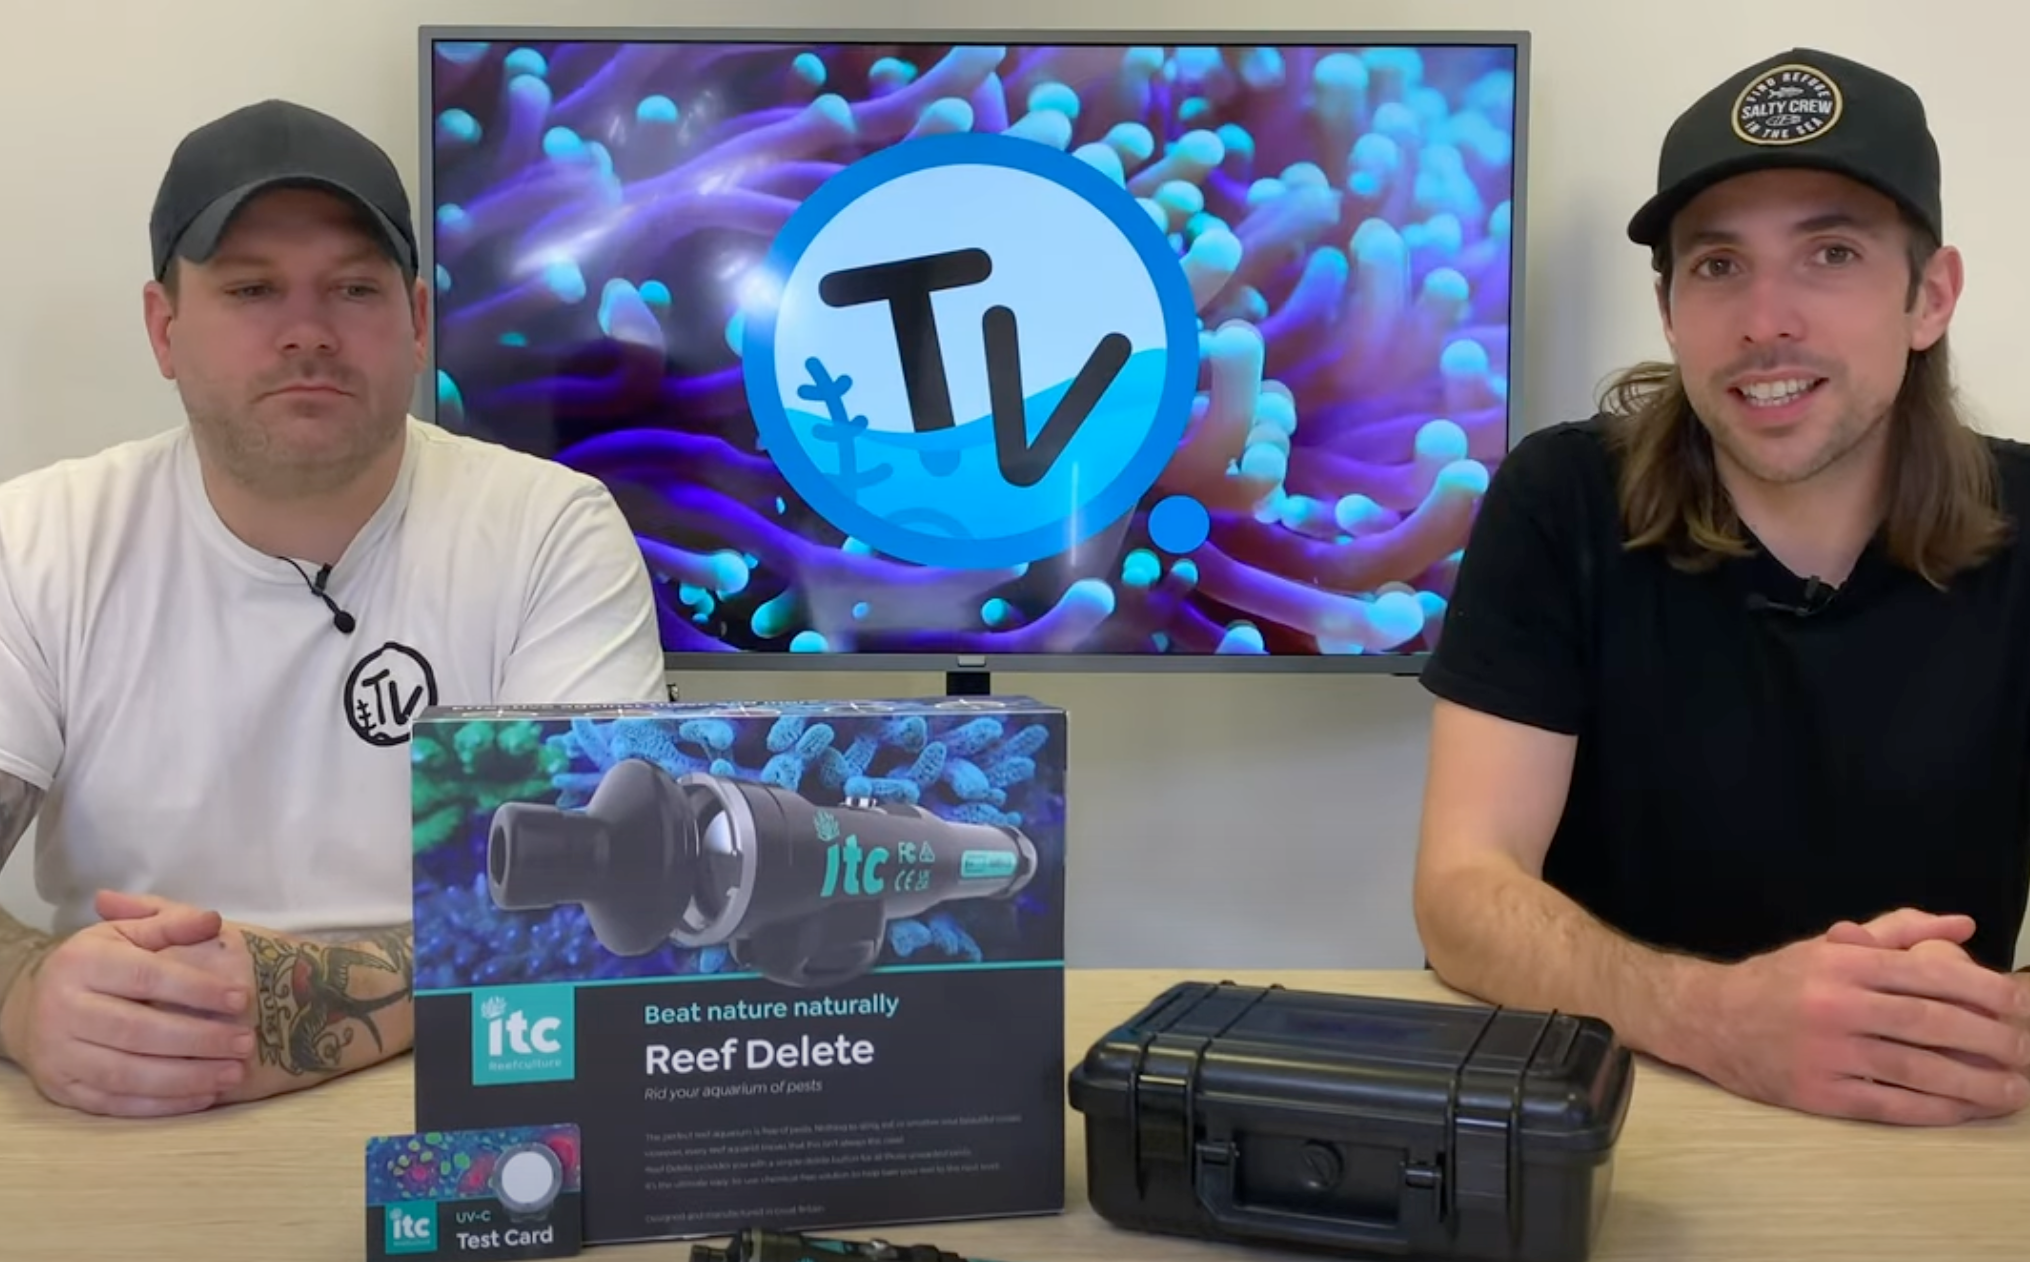 ITC Reefculture REEF DELETE - Charterhouse TV takes a closer look.